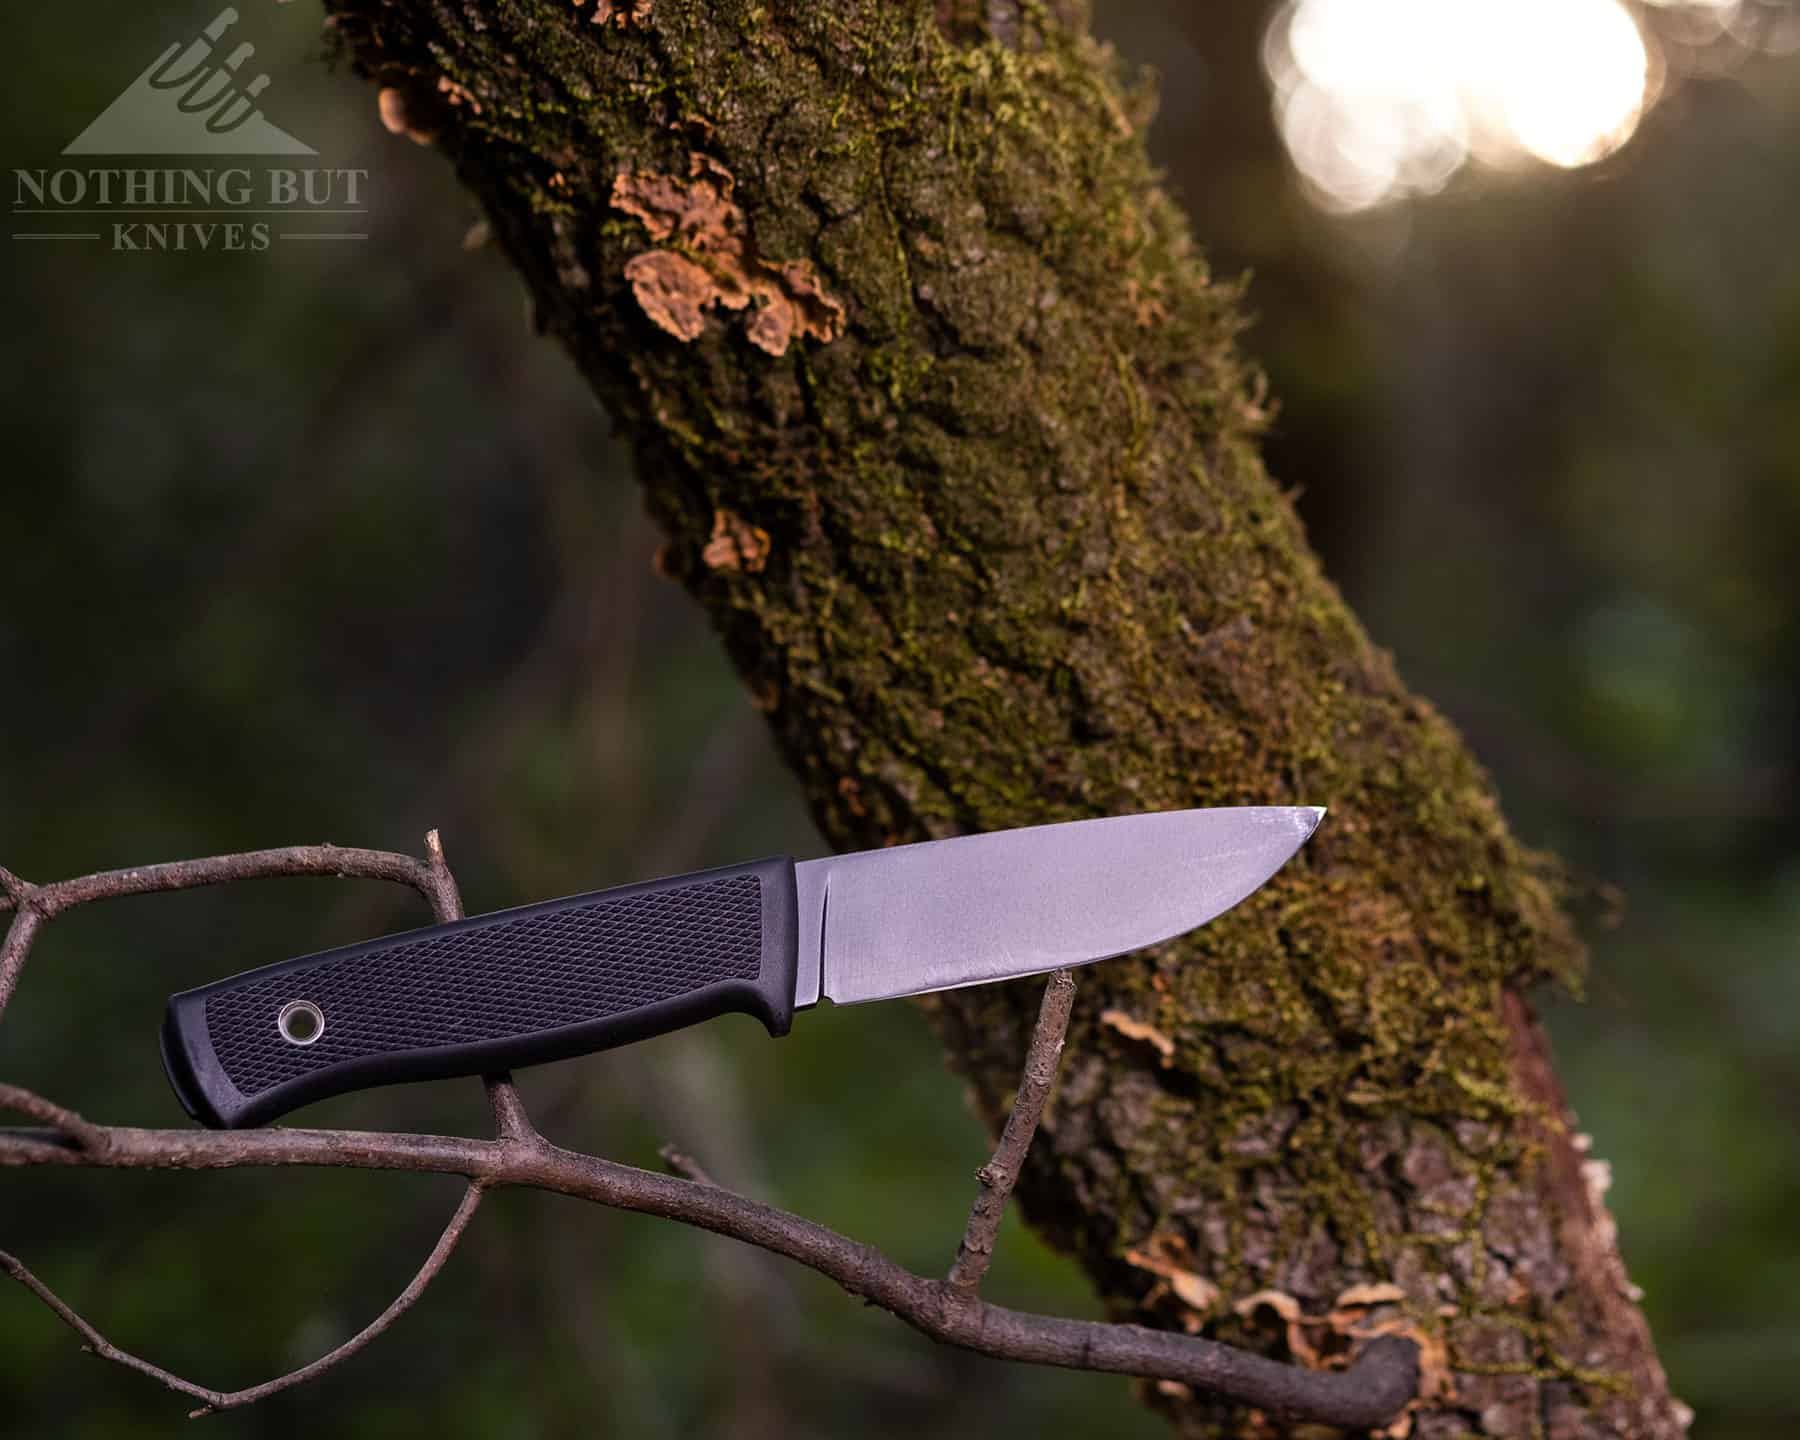 The Falkniven F1 is right at home in the Wilderness.